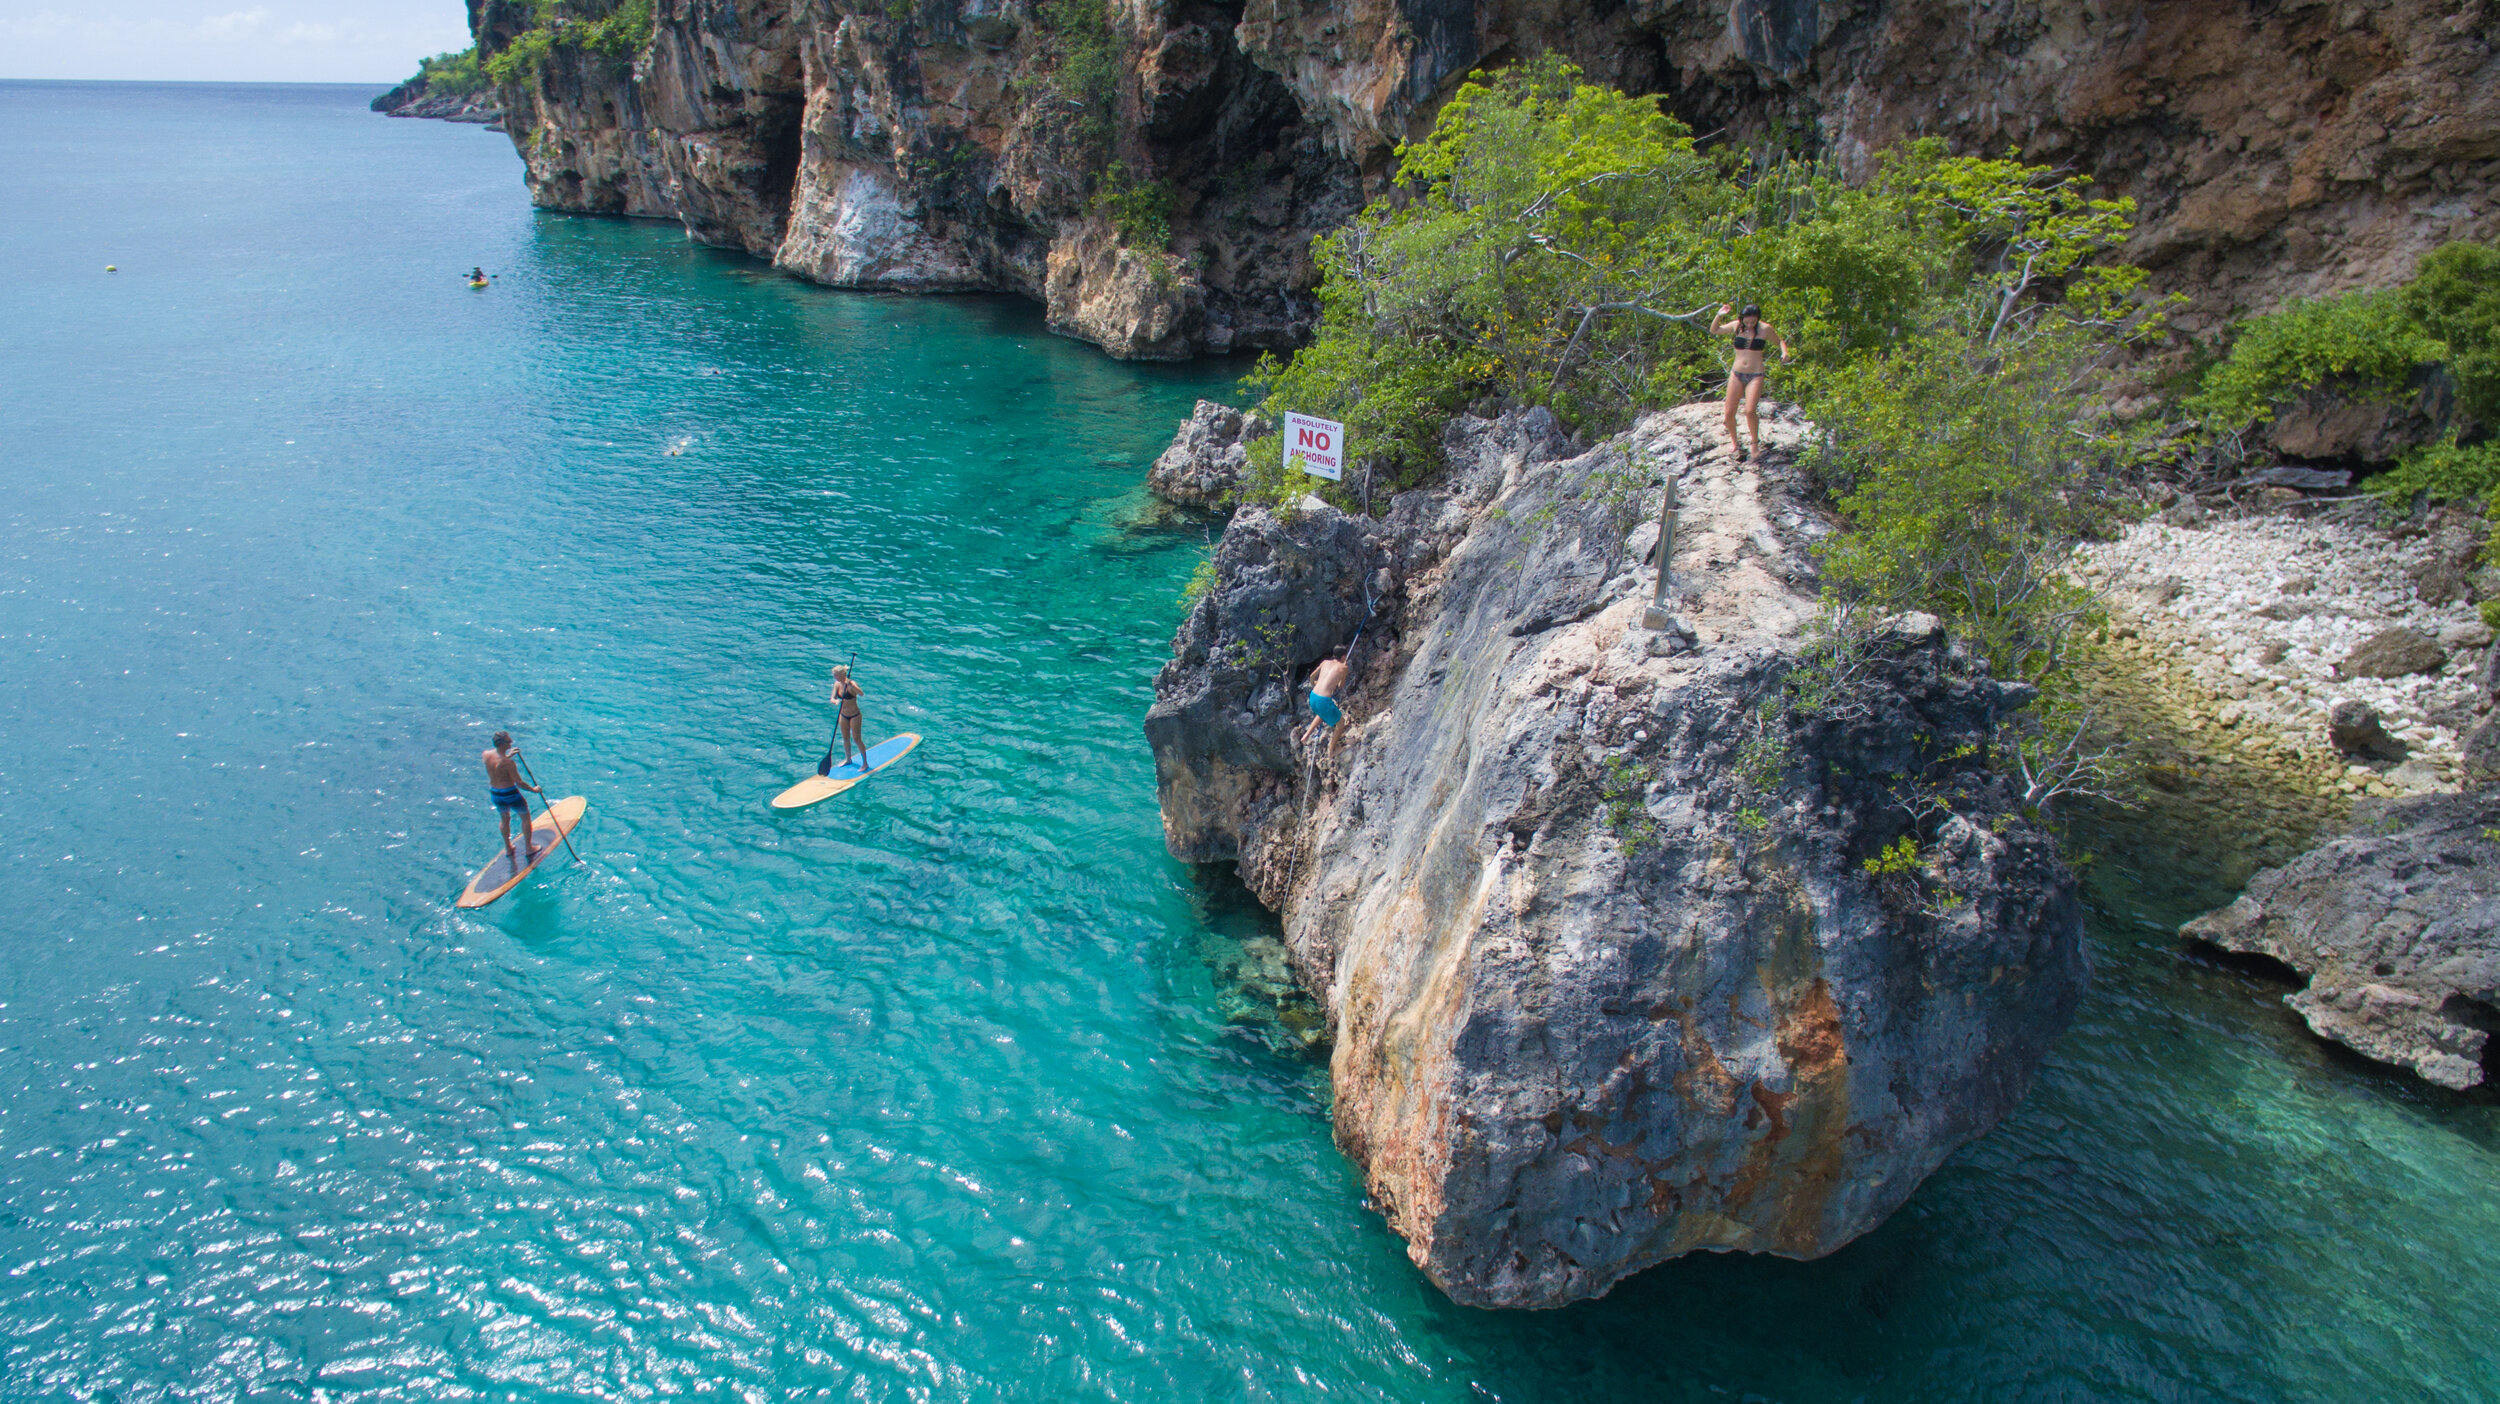   Stand-up paddle-boarding at Little Bay Beach (photo credit: ÀNI Private Resorts)  